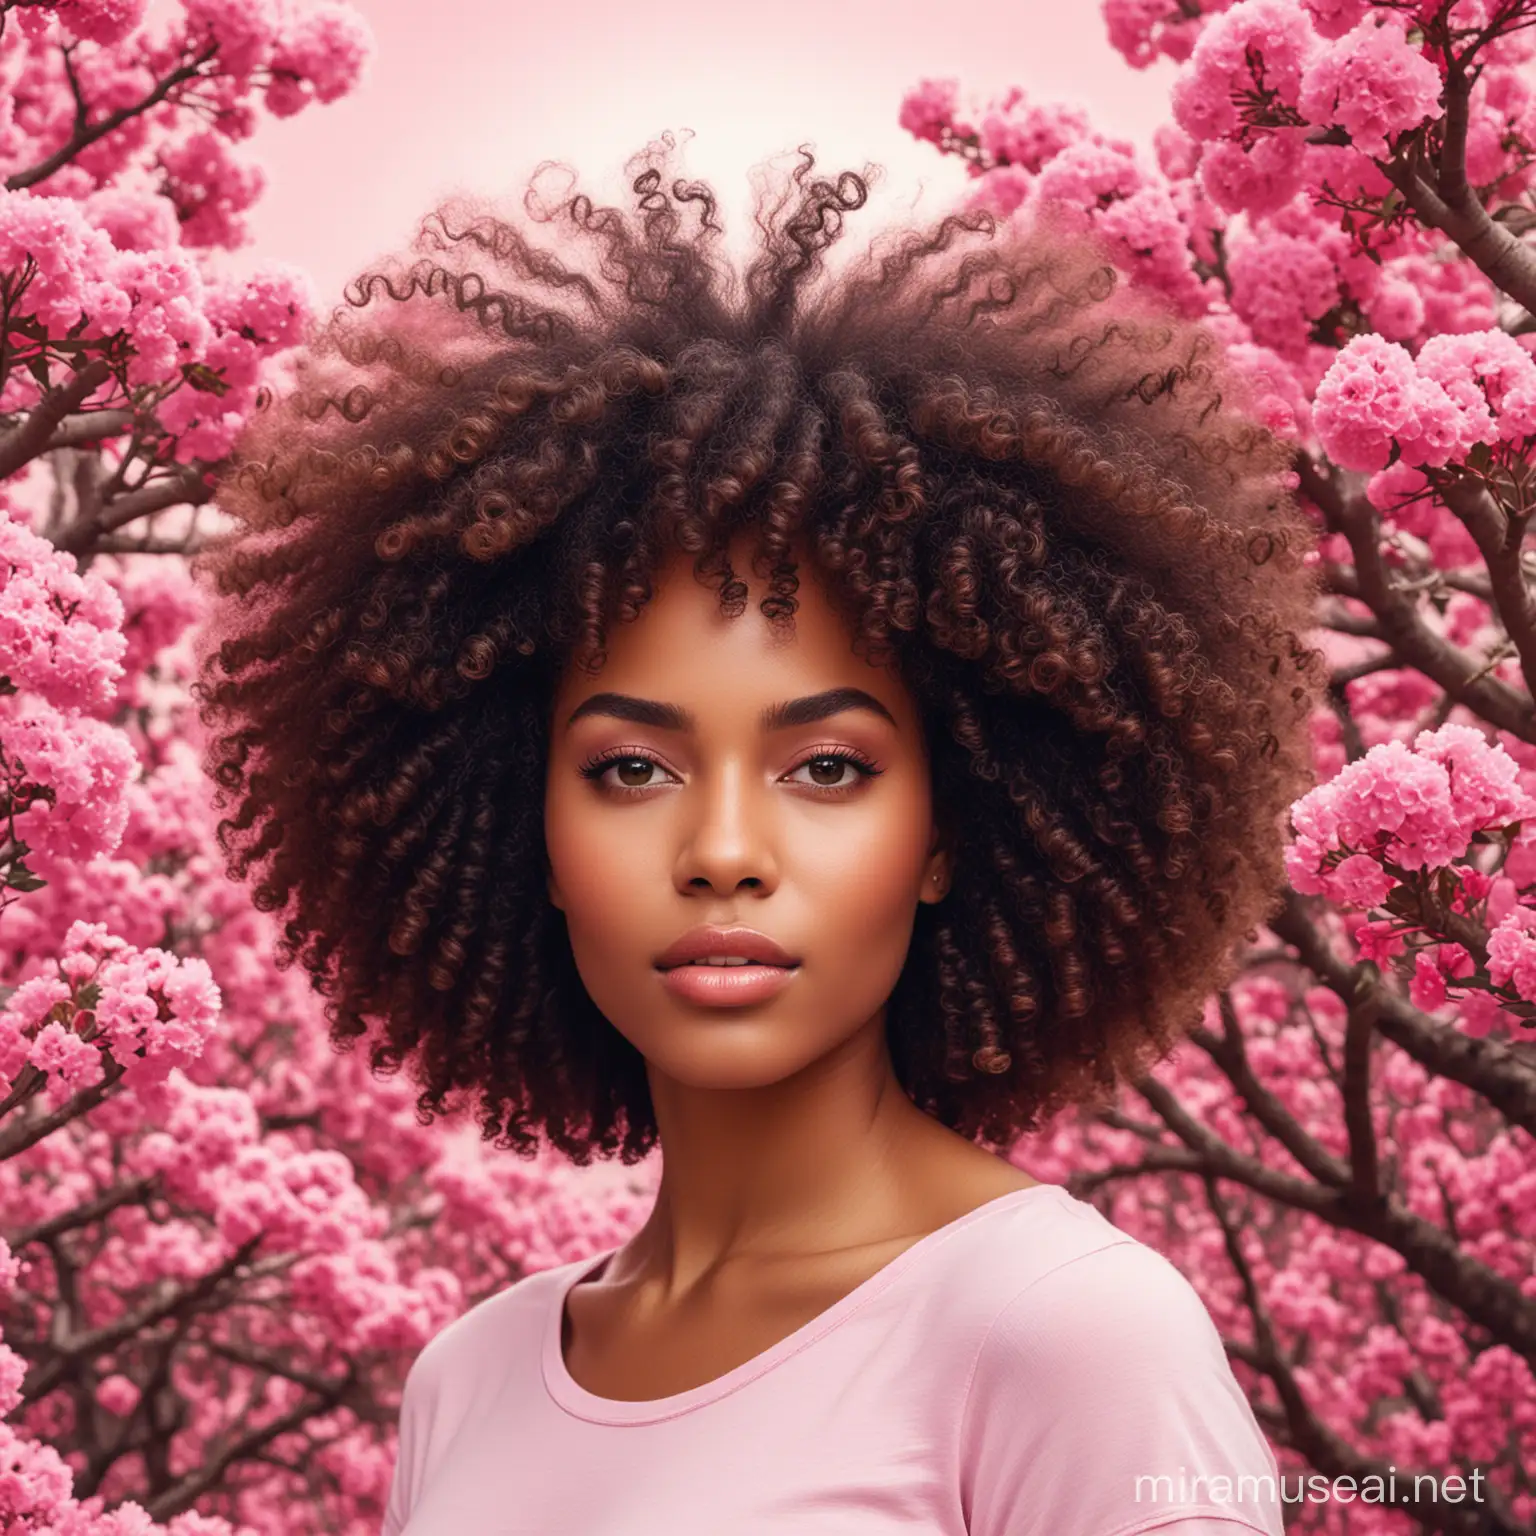 Stunning Black Woman with Curly Afro Embracing Pink Nature in a Girlish World